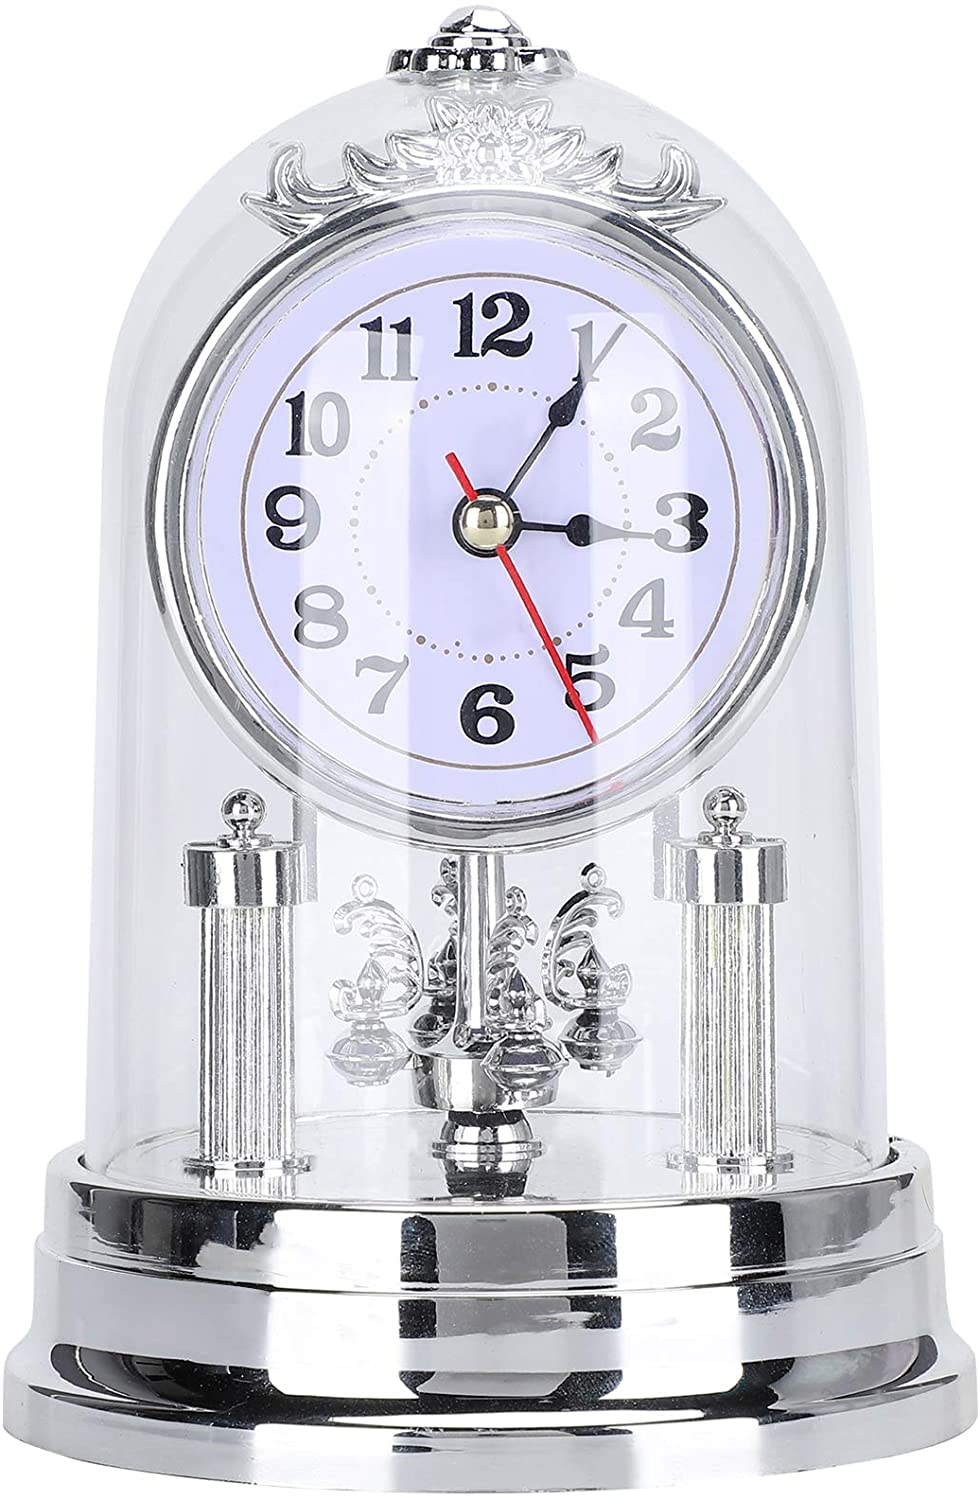 Acrylic Dome Table Clock, European Vintage Style Battery Operated